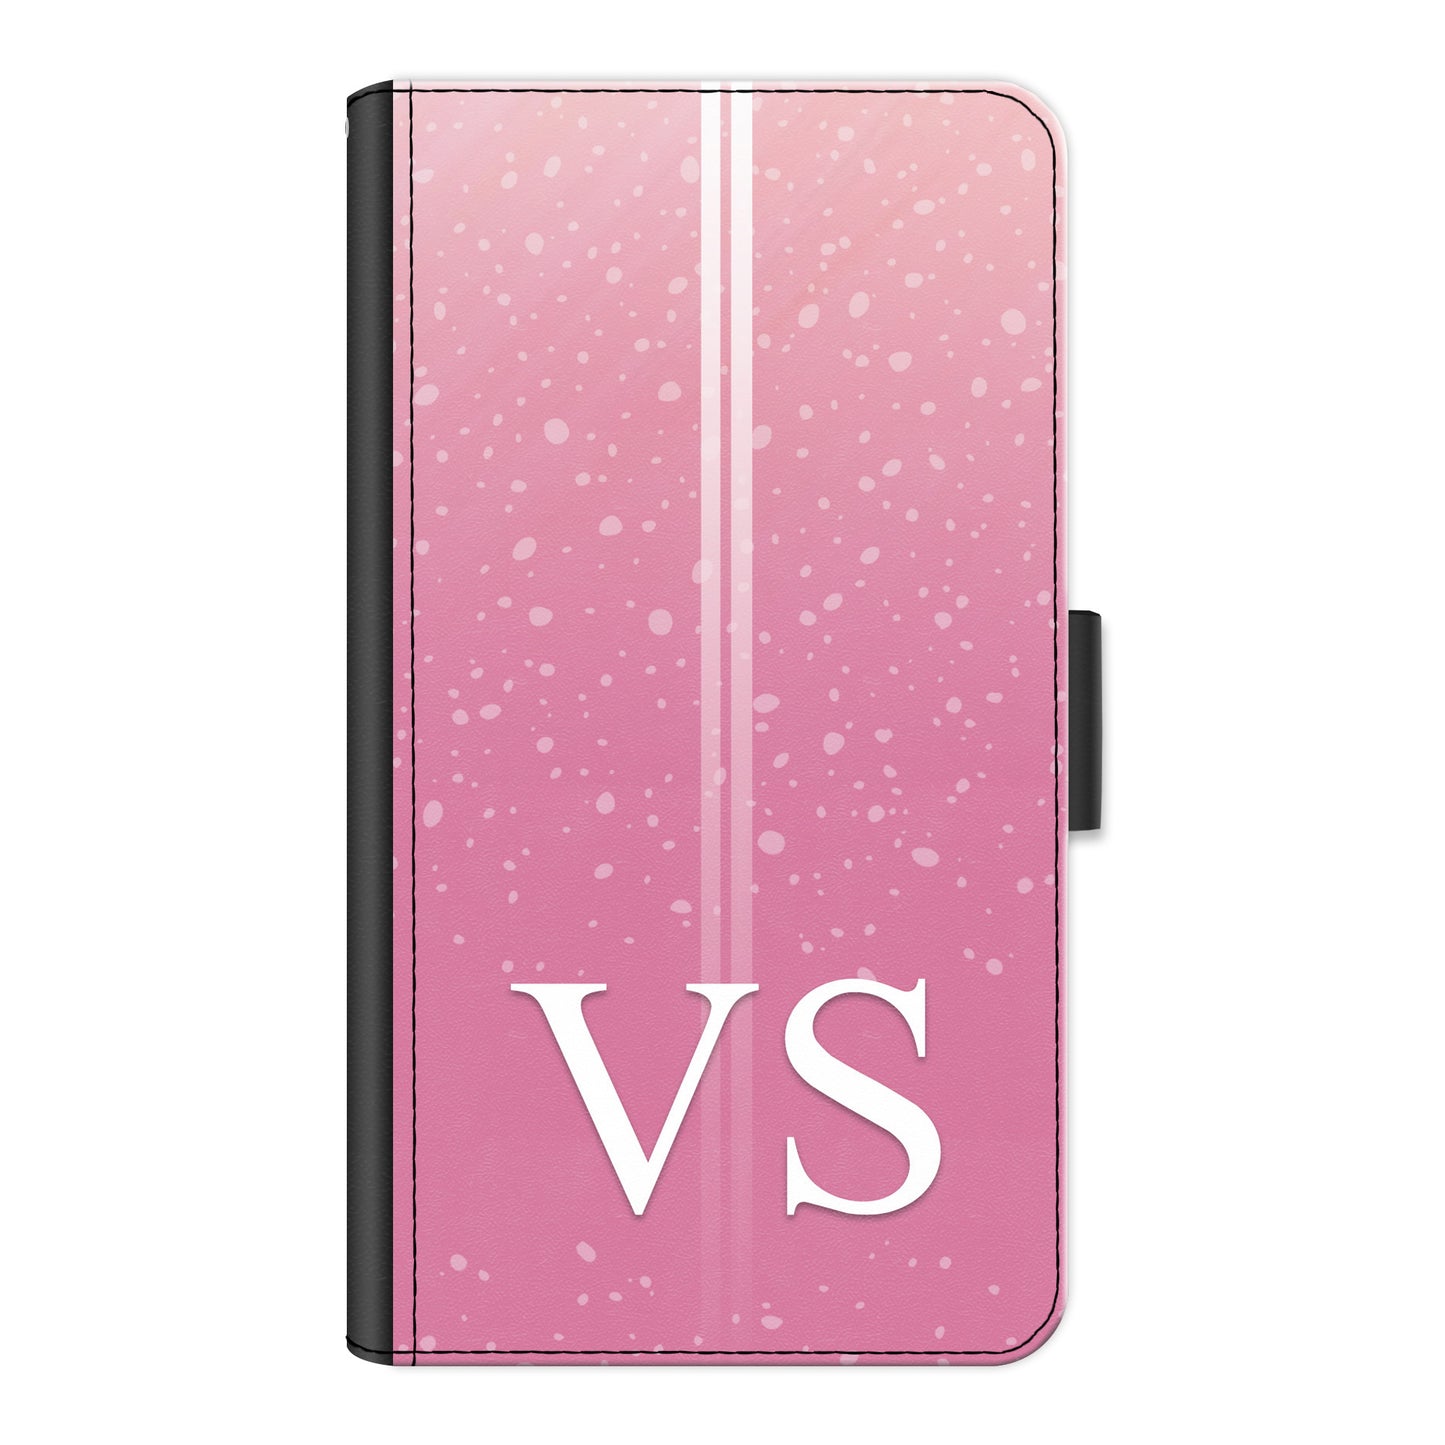 Personalised One Phone Leather Wallet with White Initials, Pin Stripes and Droplets on Pink